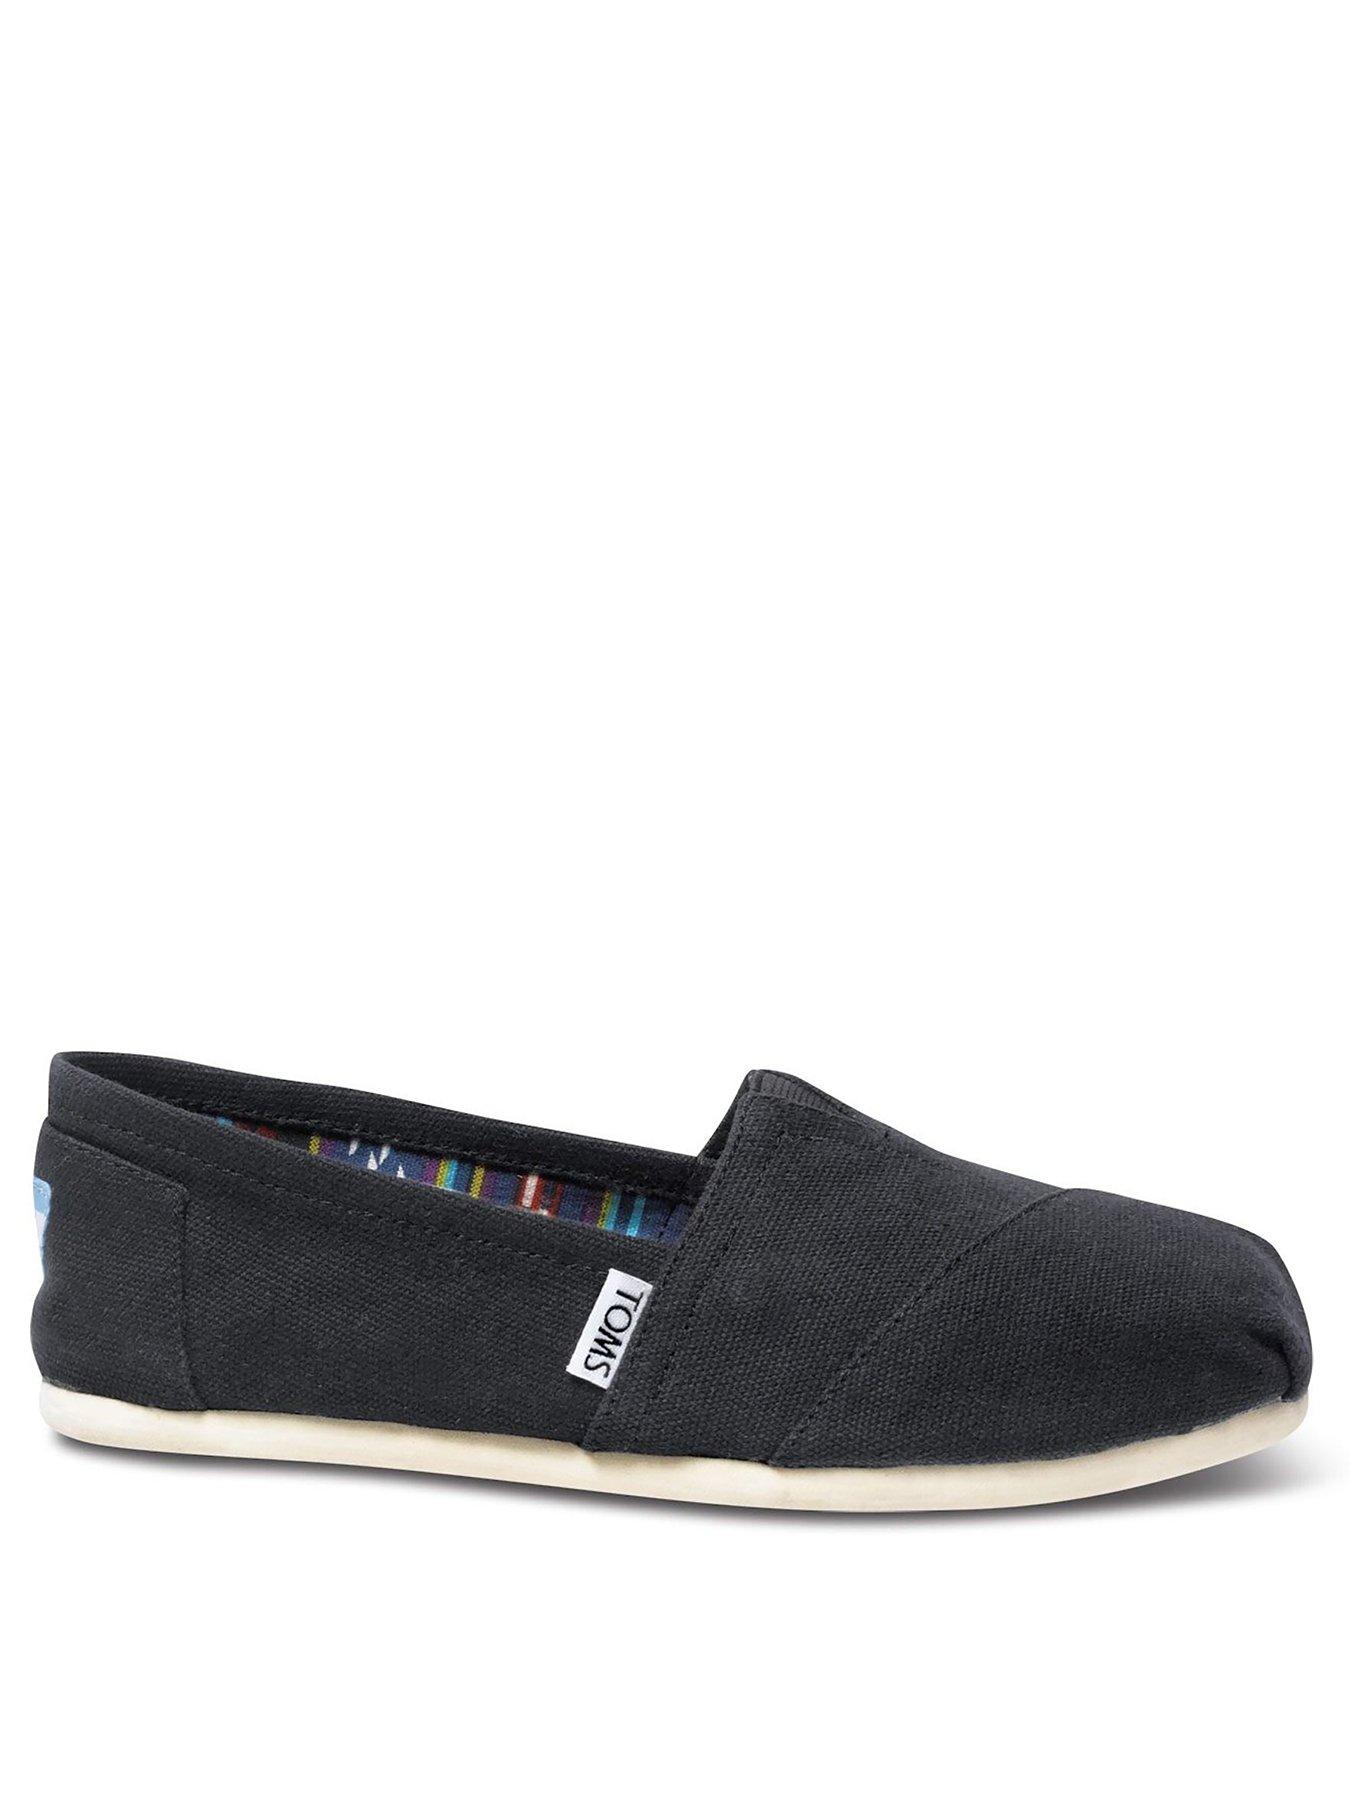 toms uk boots